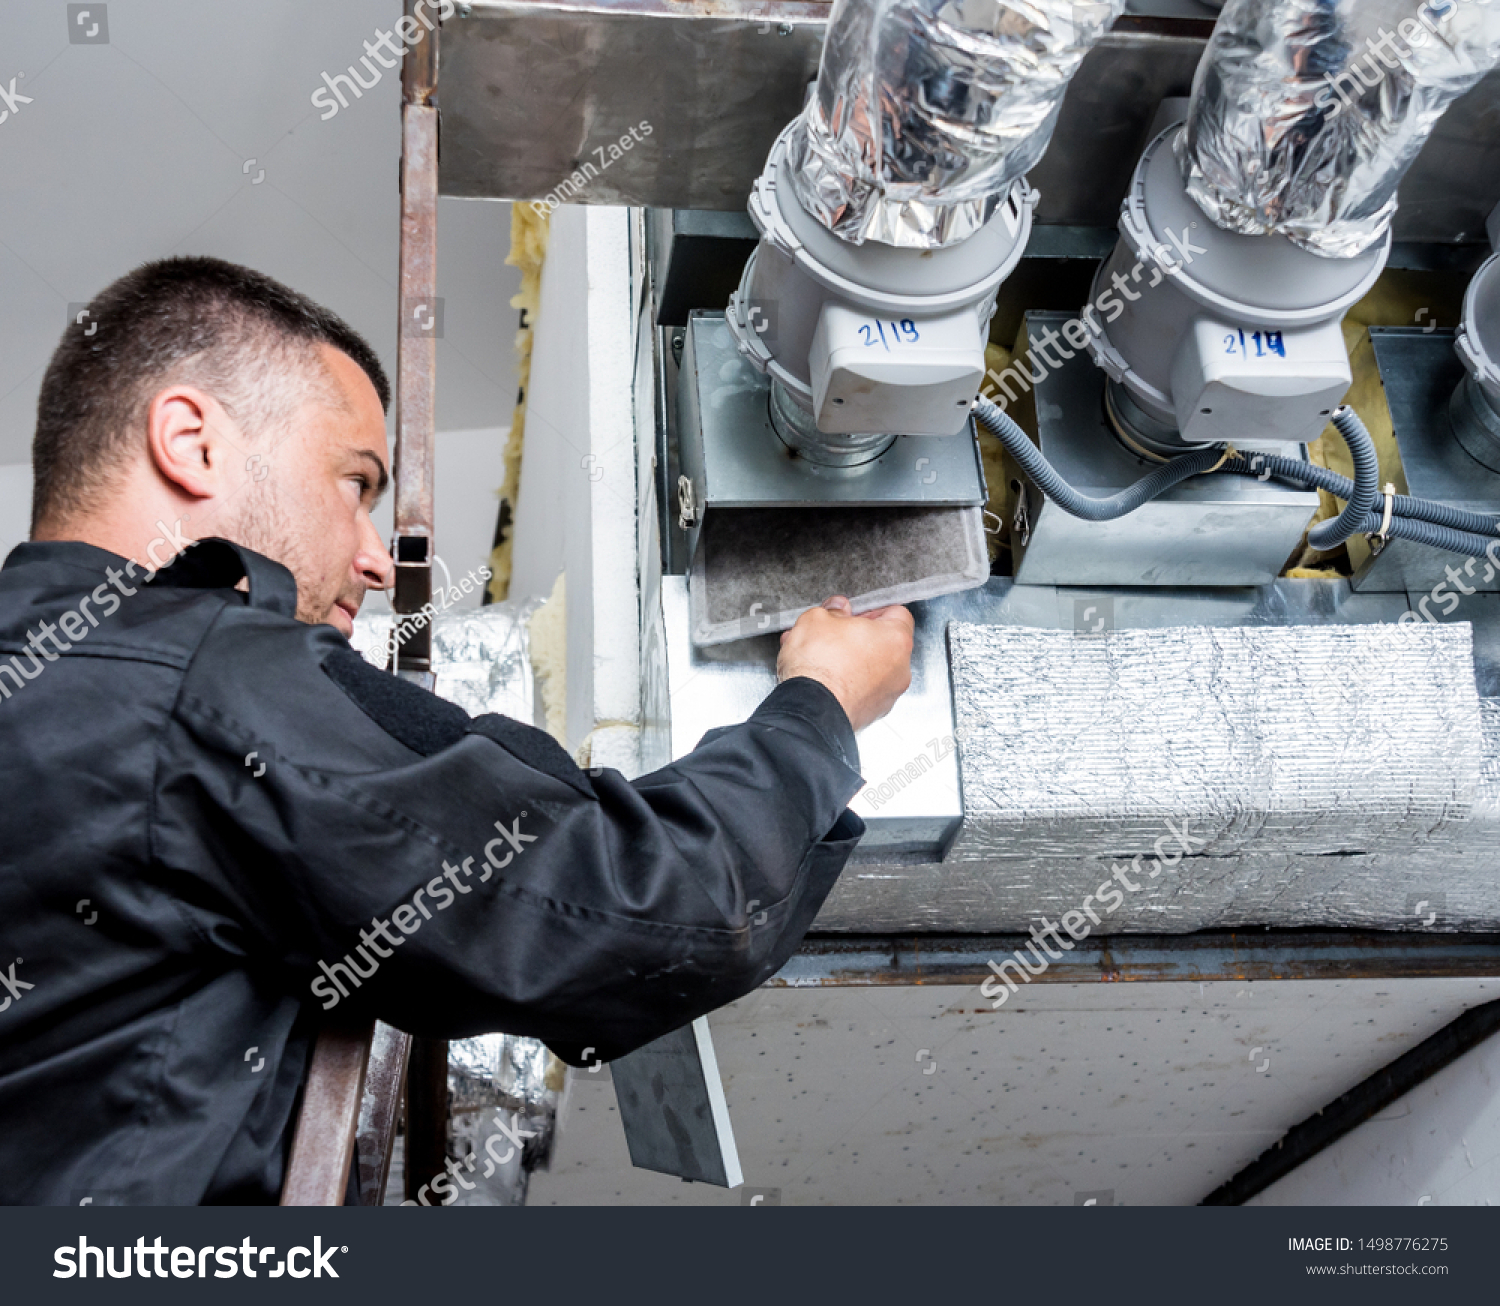 Ventilation cleaning. Specialist at work. Repair ventilation system (HVAC). Industrial background #1498776275